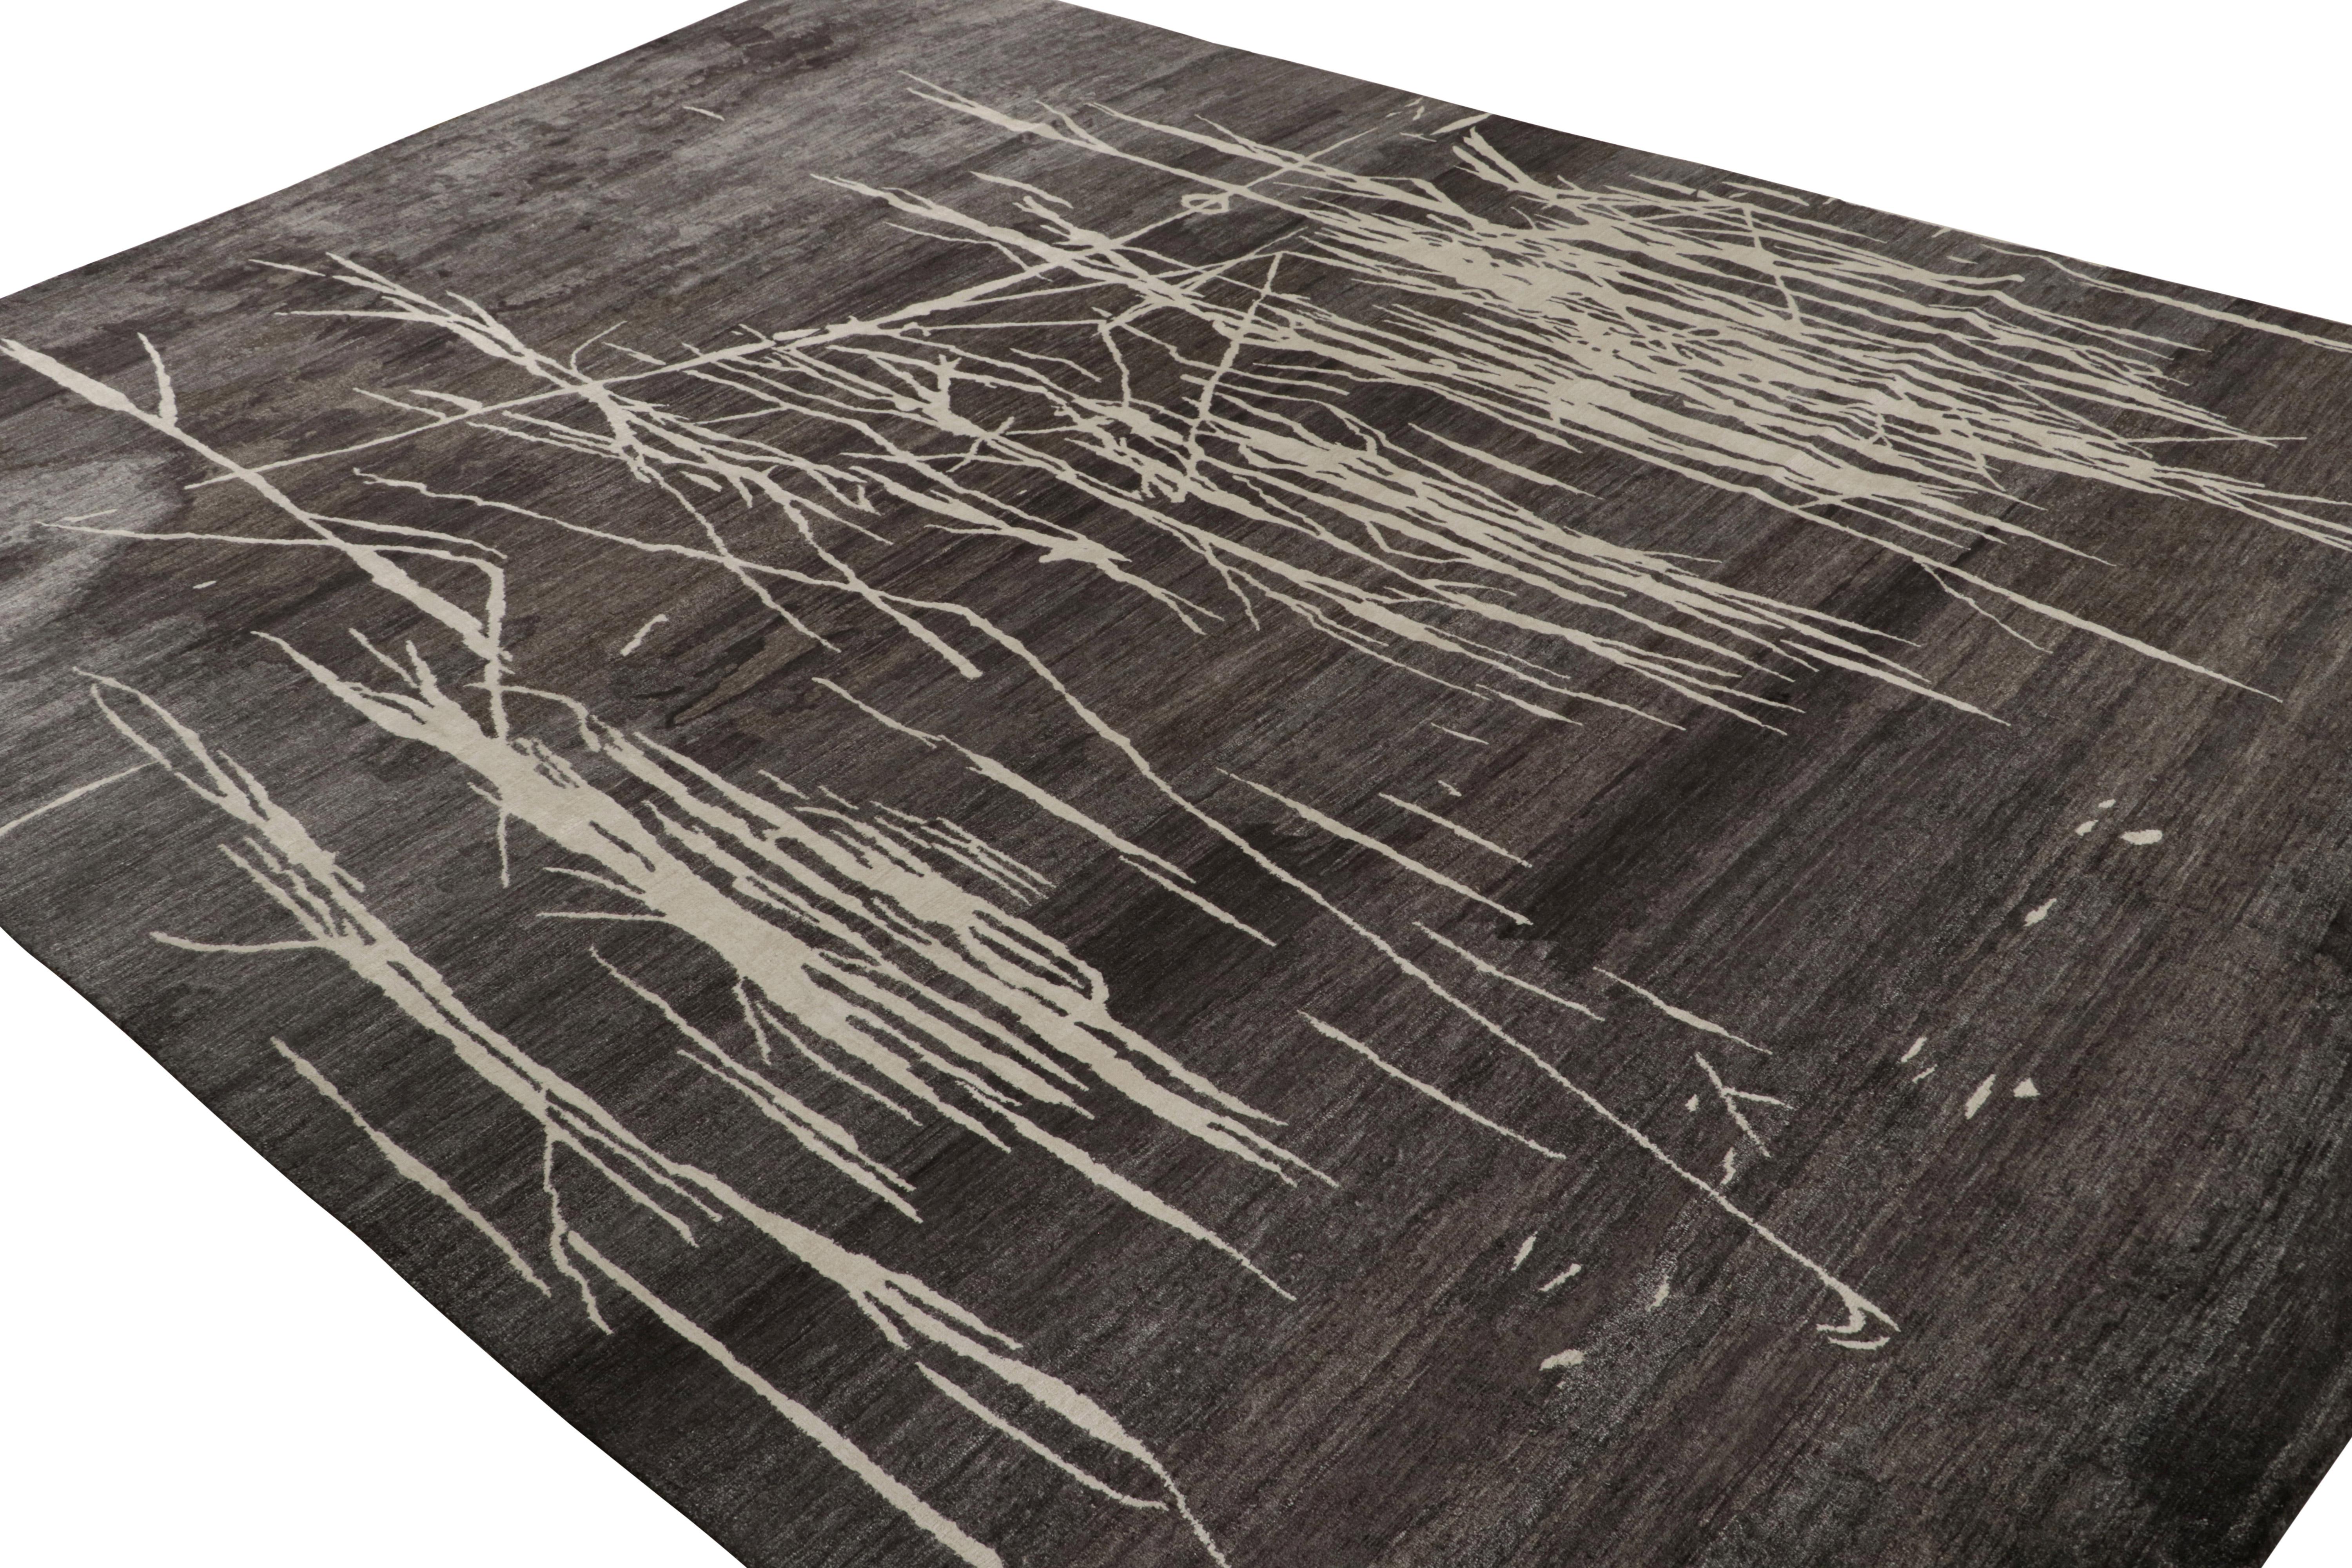 Hand-knotted in silk, this 9x12 abstract rug is a bold new addition to the Rug & Kilim Modern Collection. Its minimalist design enjoys a play of off-white geometric patterns on a lustrous black field with gray undertones.

On the Design: 

“Water